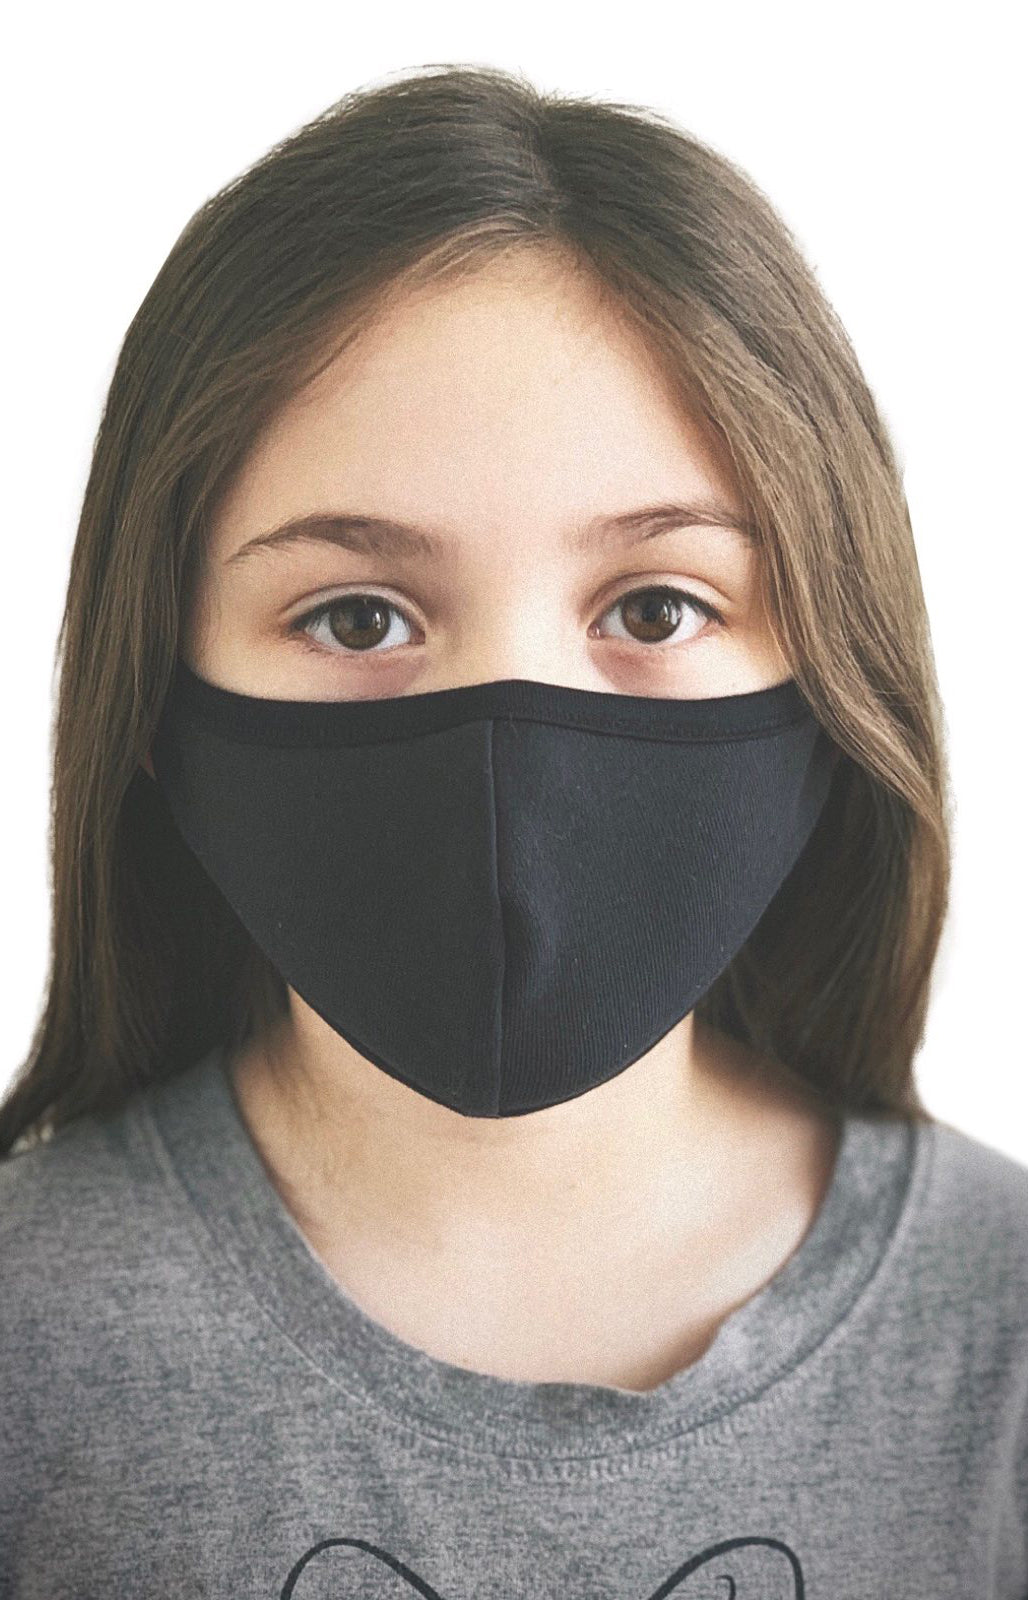 Protective Mask For Children